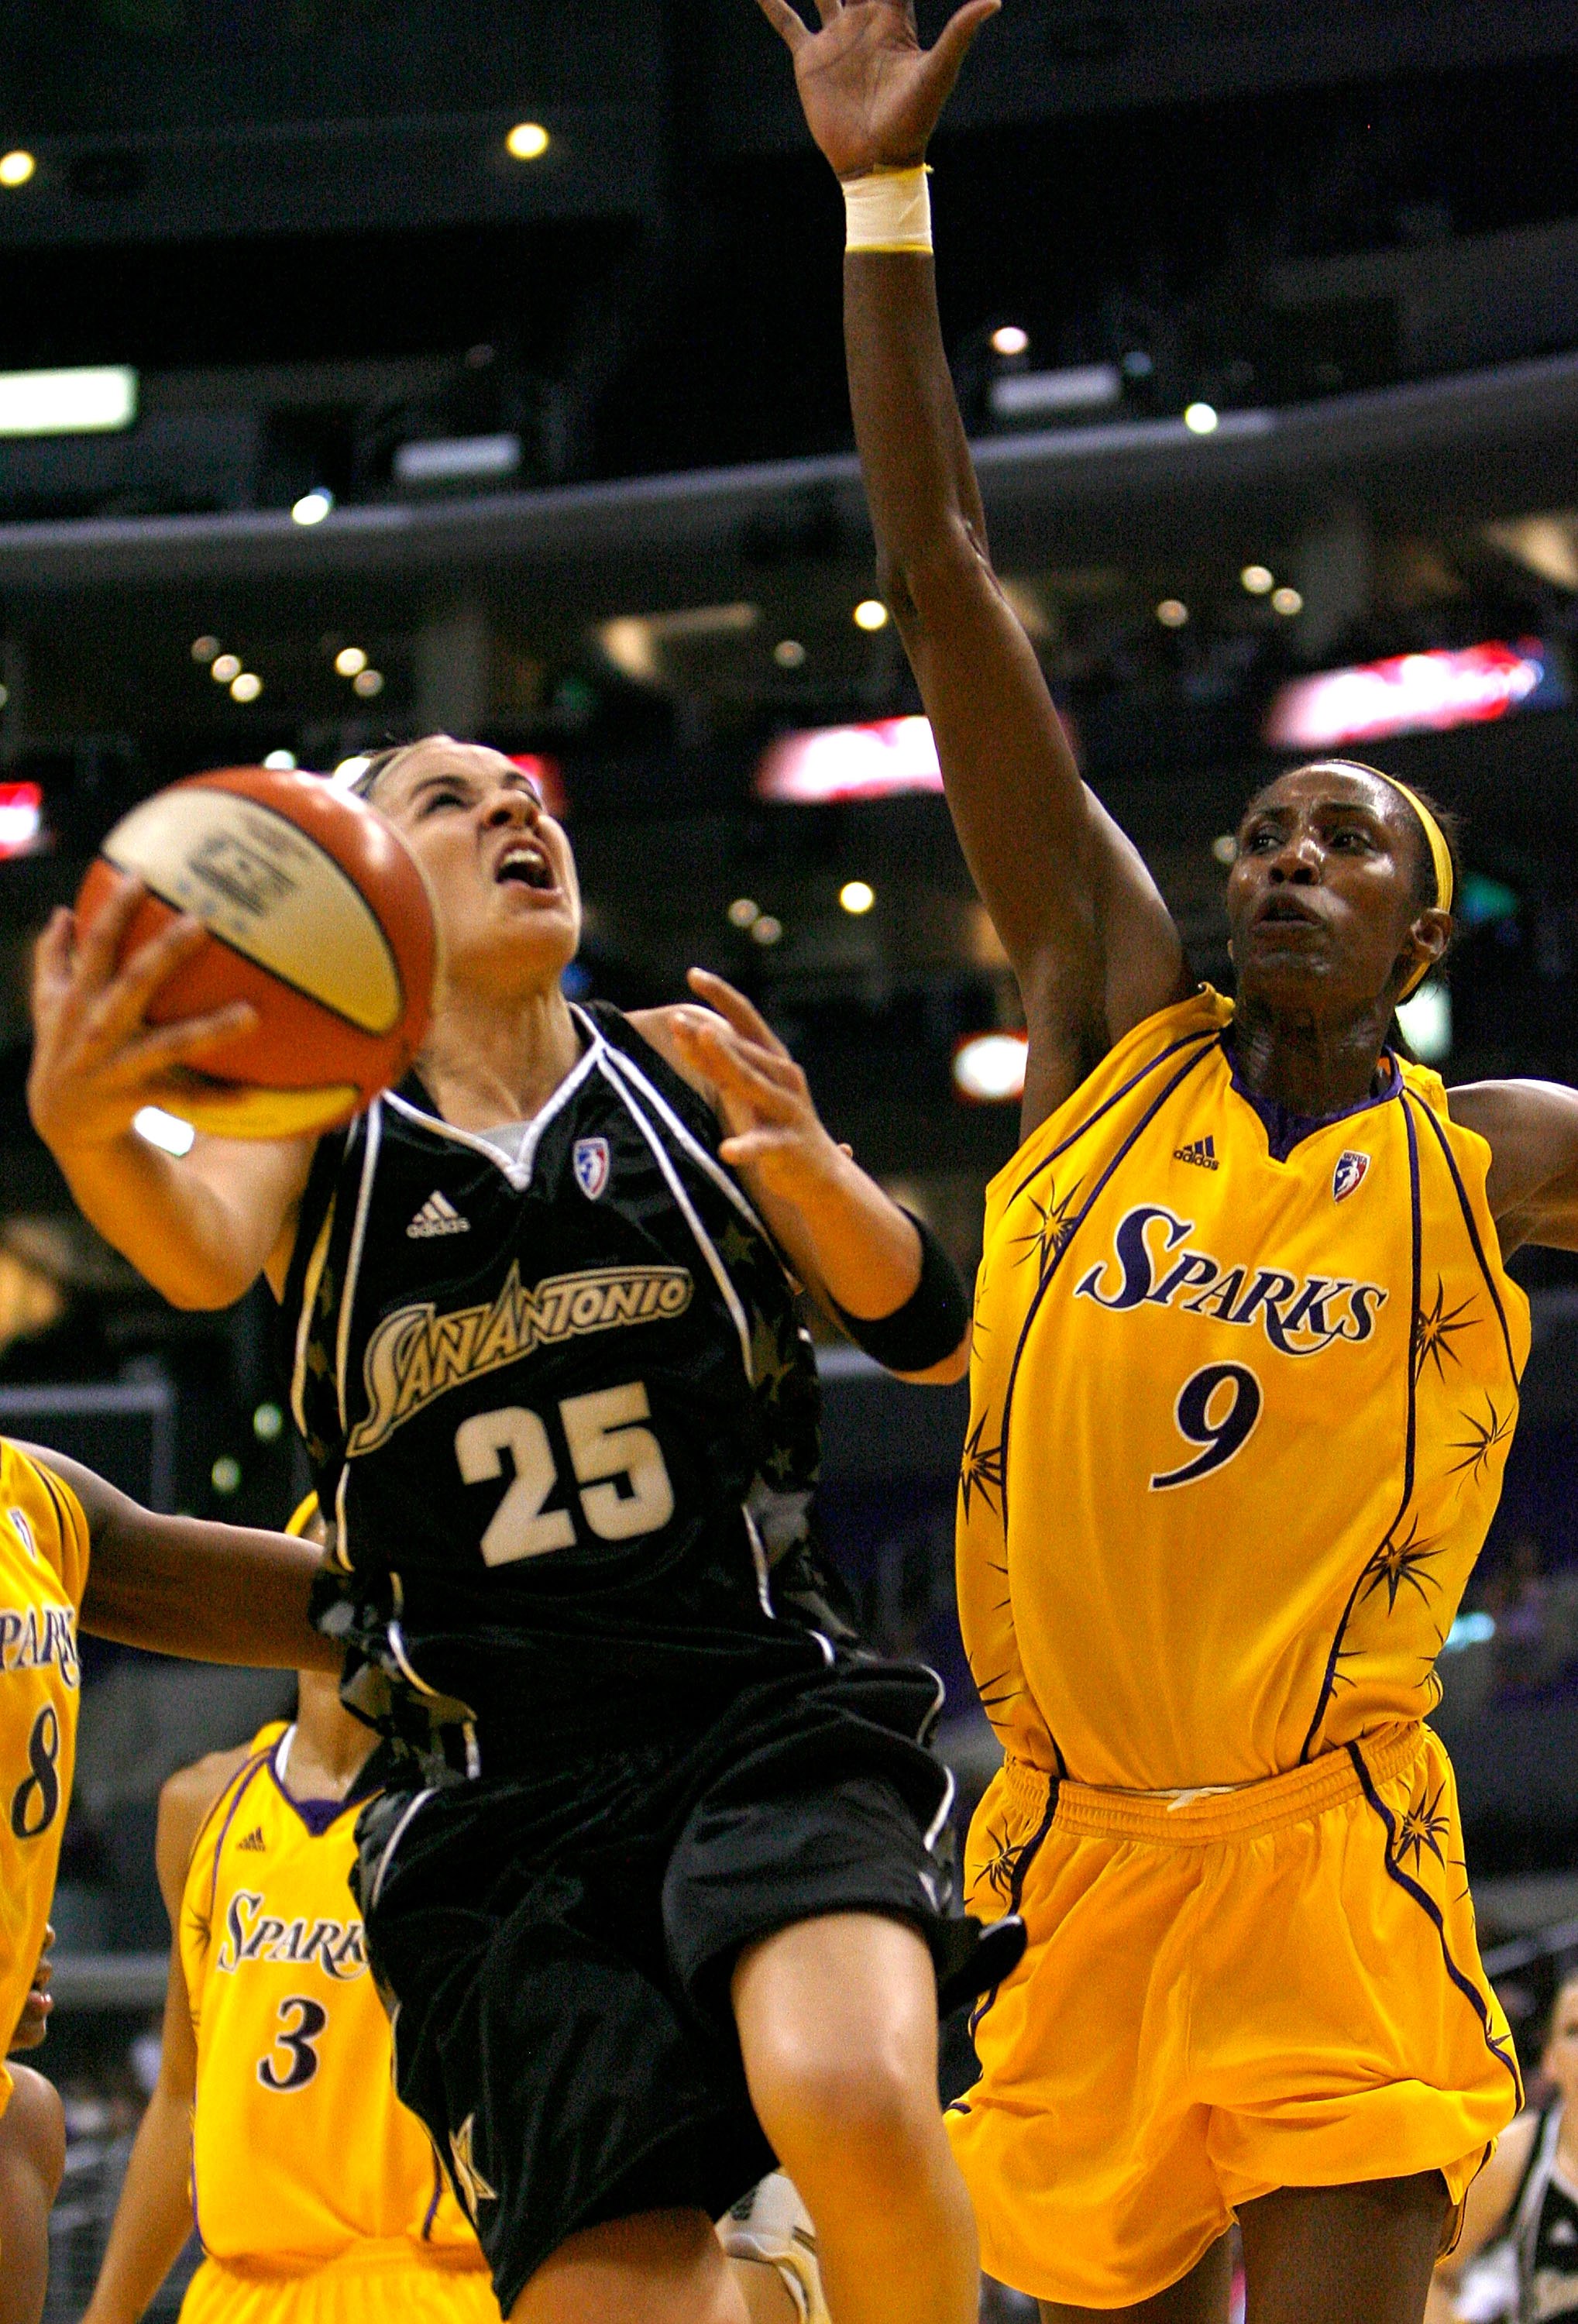 LOS ANGELES, CA - JULY 14:  Becky Hammon #25 of the San Antonio Silver Stars puts up a shot against Lisa Leslie #9 of the Los Angeles Sparks during the game on July 14, 2008 at the Staples Center in Los Angeles, California.  The Sparks beat the Silver Sta